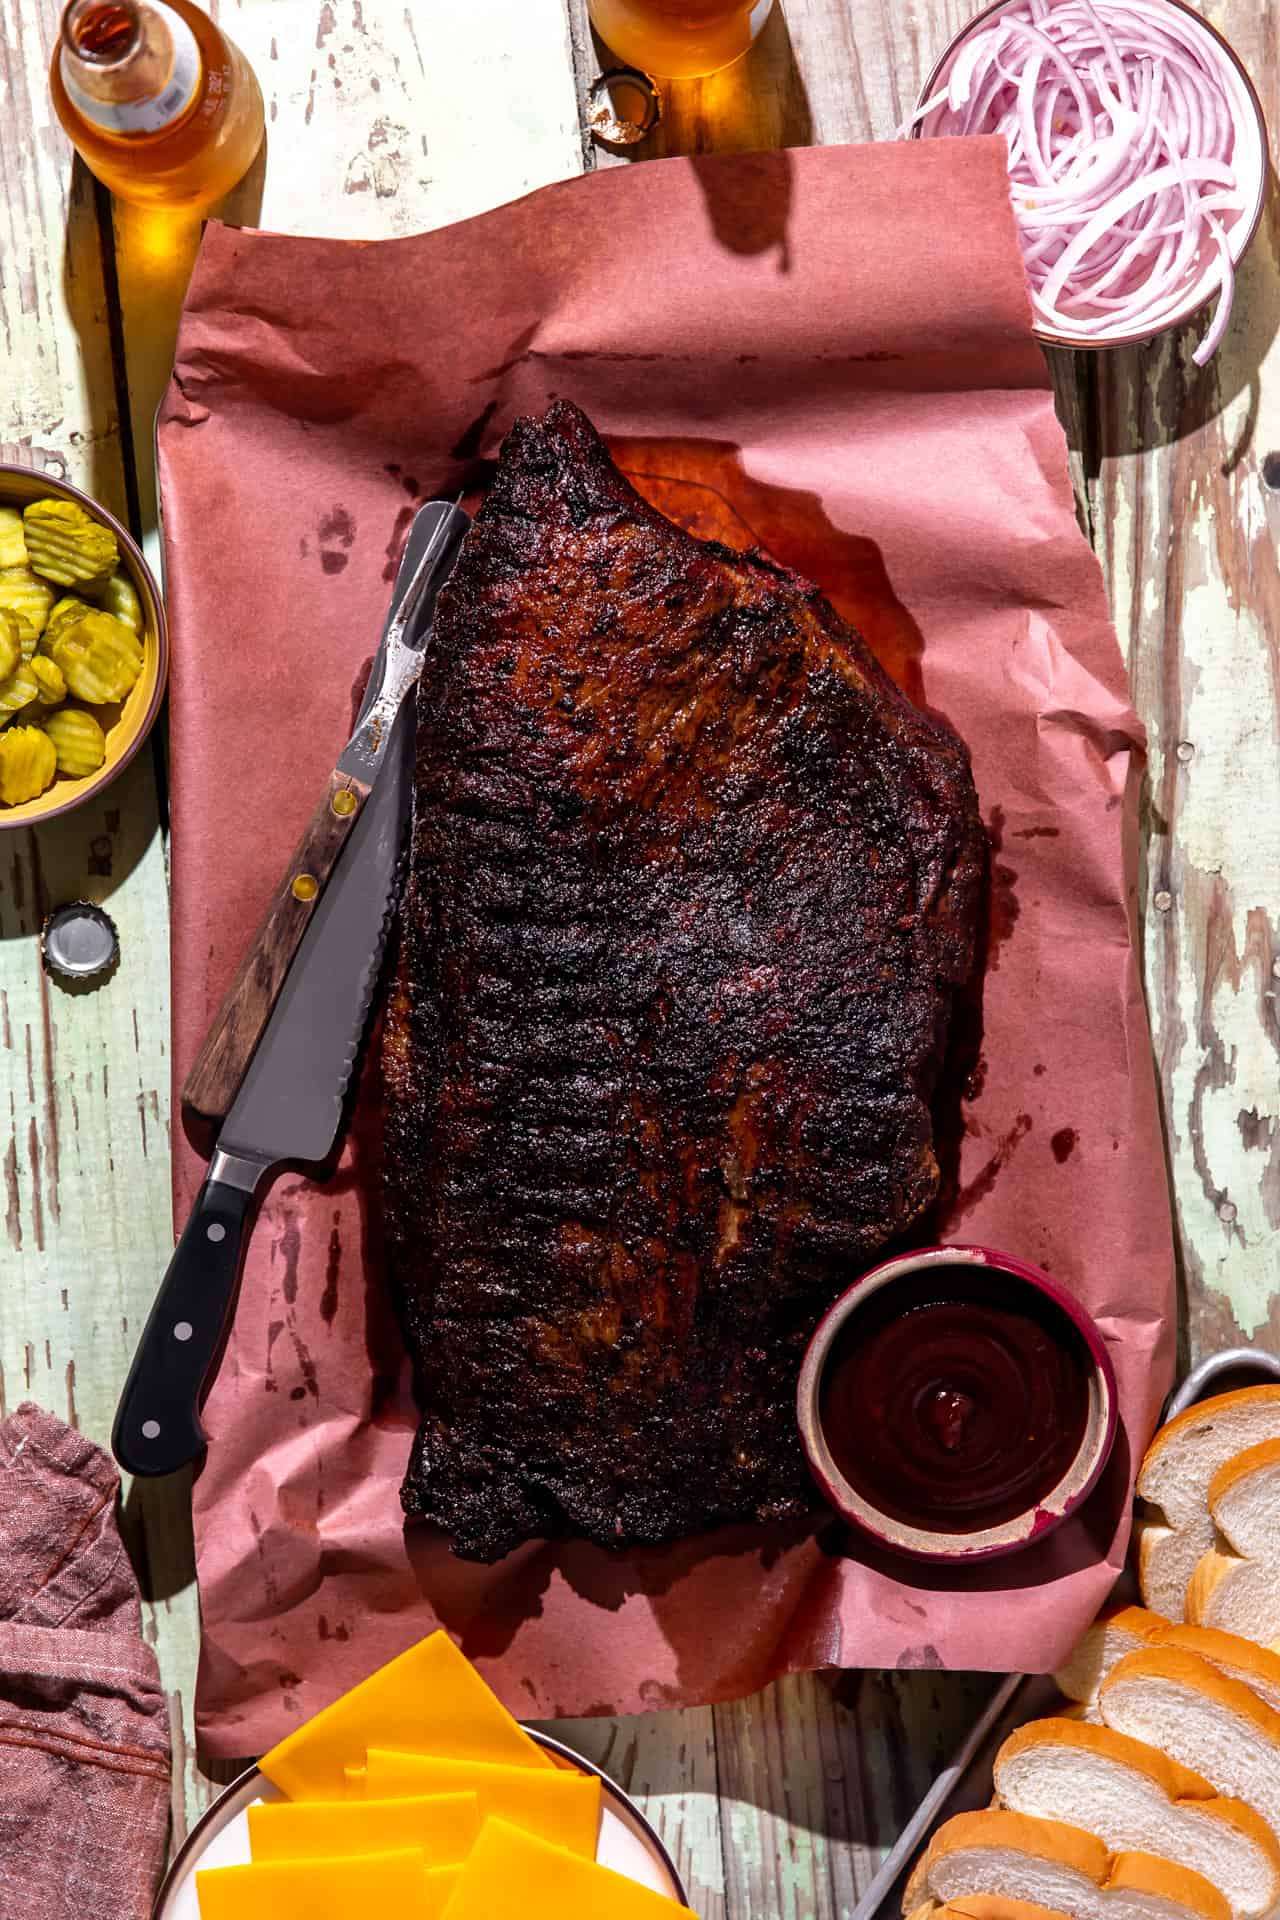 Whole brisket laying on peach paper after being smoked.